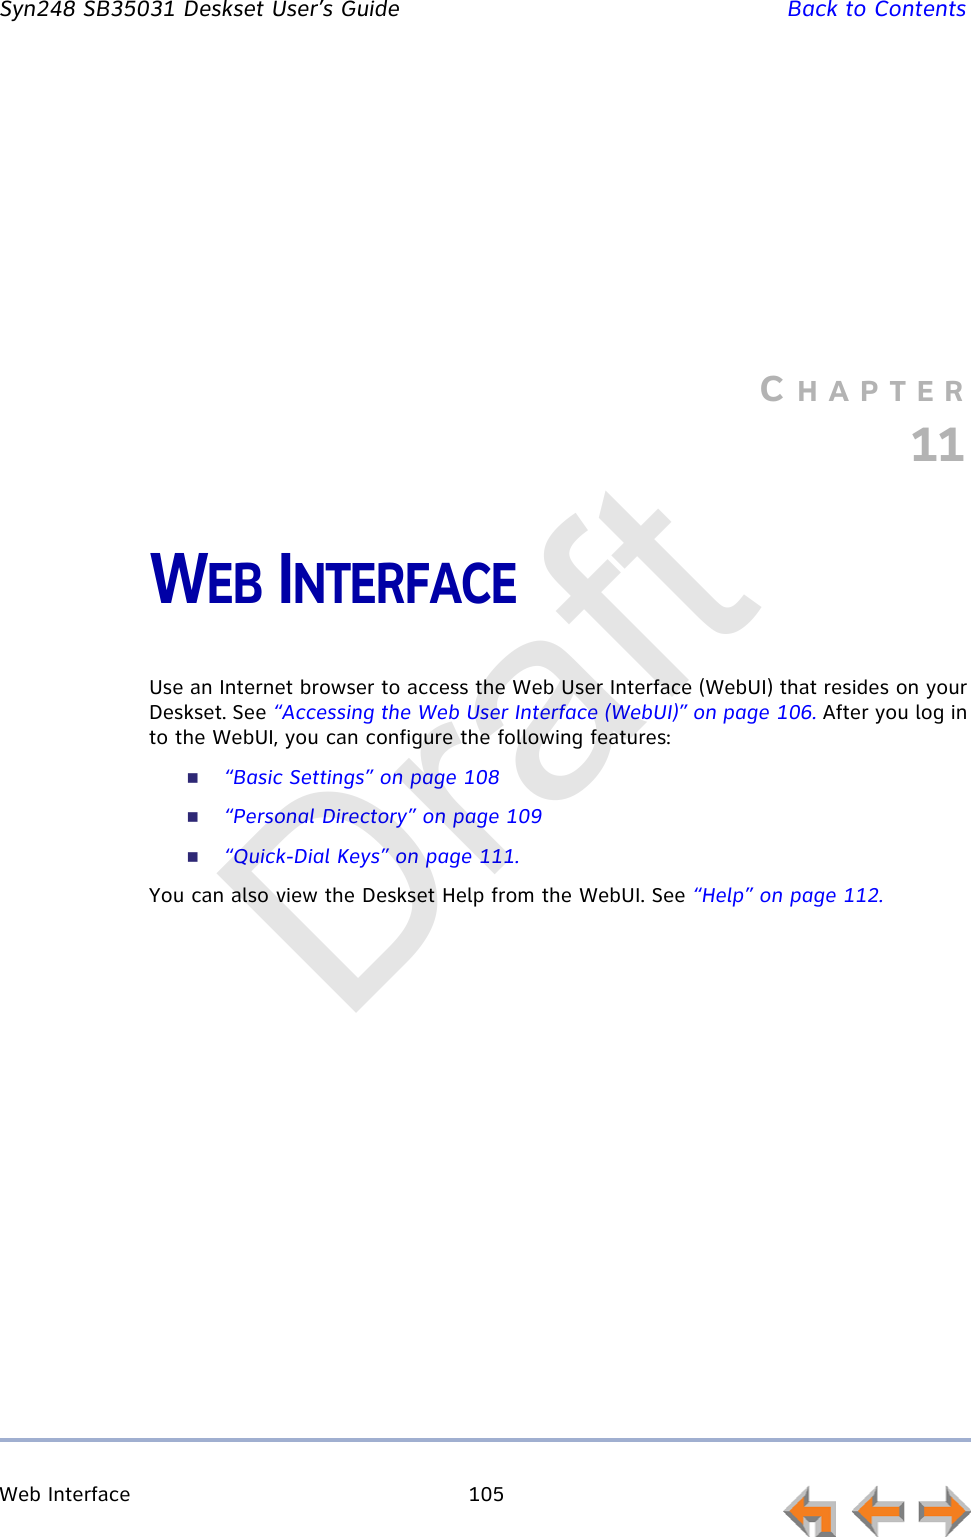 Web Interface 105         Syn248 SB35031 Deskset User’s Guide Back to ContentsCHAPTER11WEB INTERFACEUse an Internet browser to access the Web User Interface (WebUI) that resides on your Deskset. See “Accessing the Web User Interface (WebUI)” on page 106. After you log in to the WebUI, you can configure the following features:“Basic Settings” on page 108“Personal Directory” on page 109“Quick-Dial Keys” on page 111.You can also view the Deskset Help from the WebUI. See “Help” on page 112.Draft